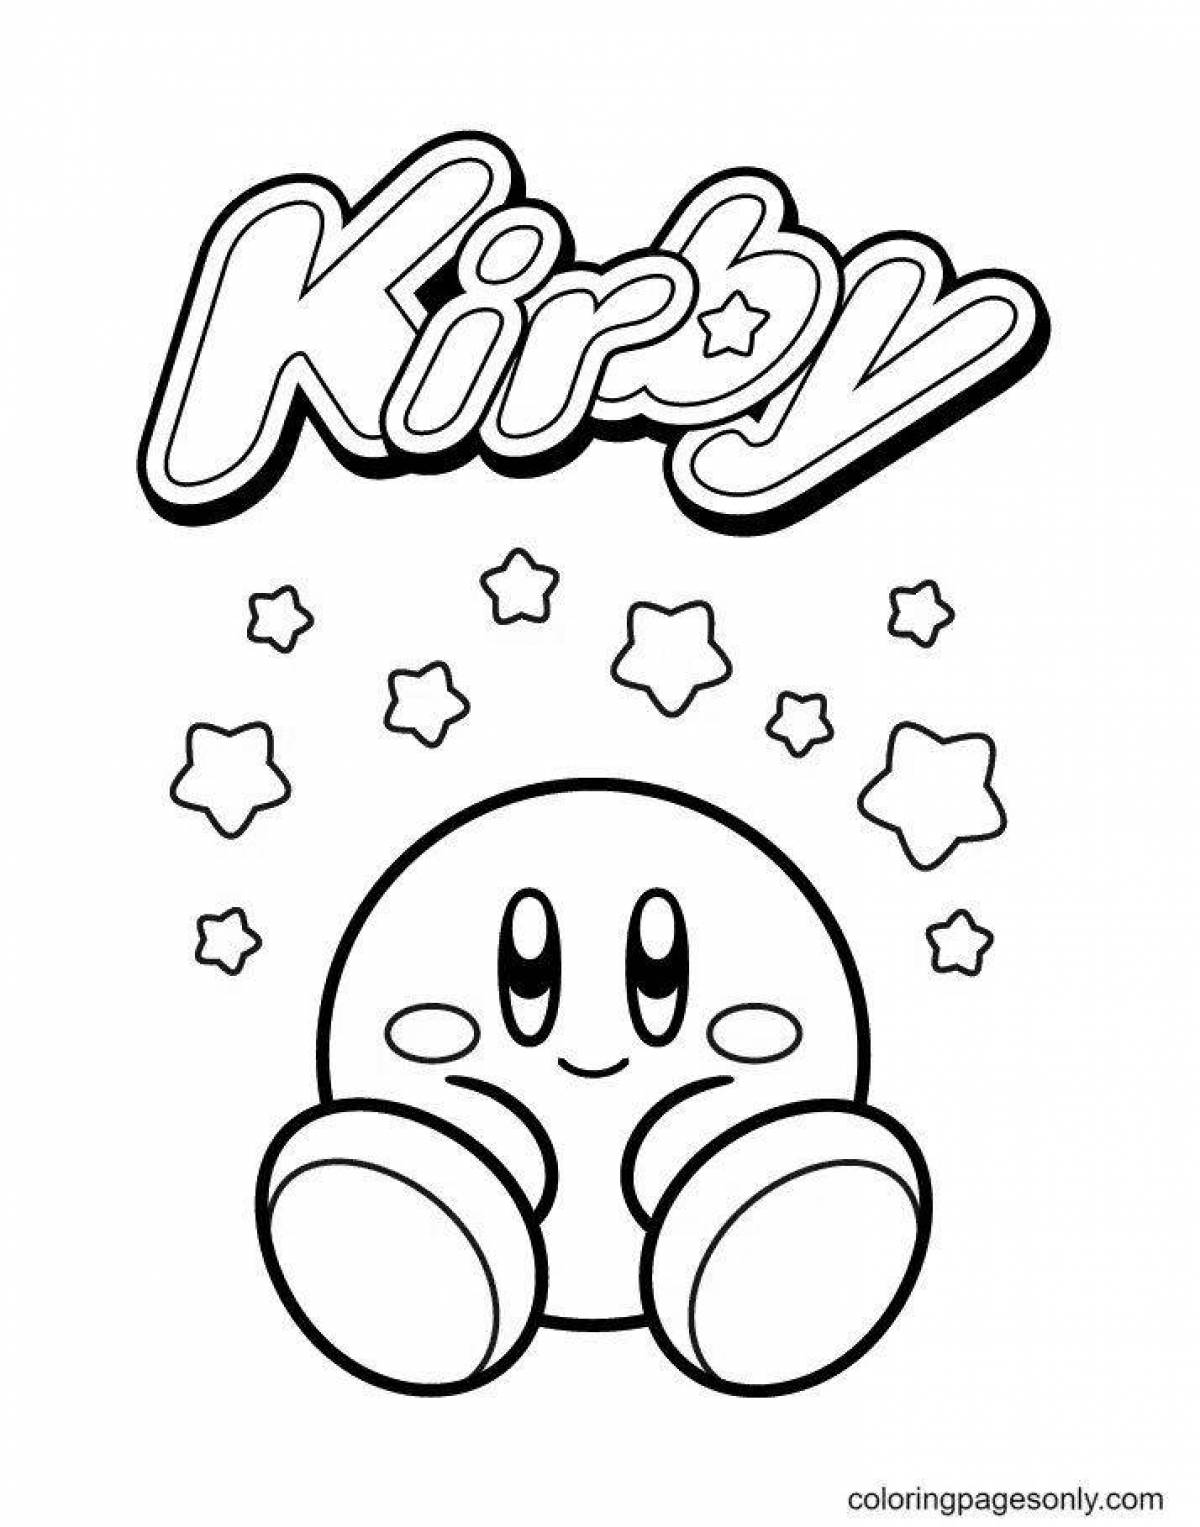 Kirby's incredible coloring book